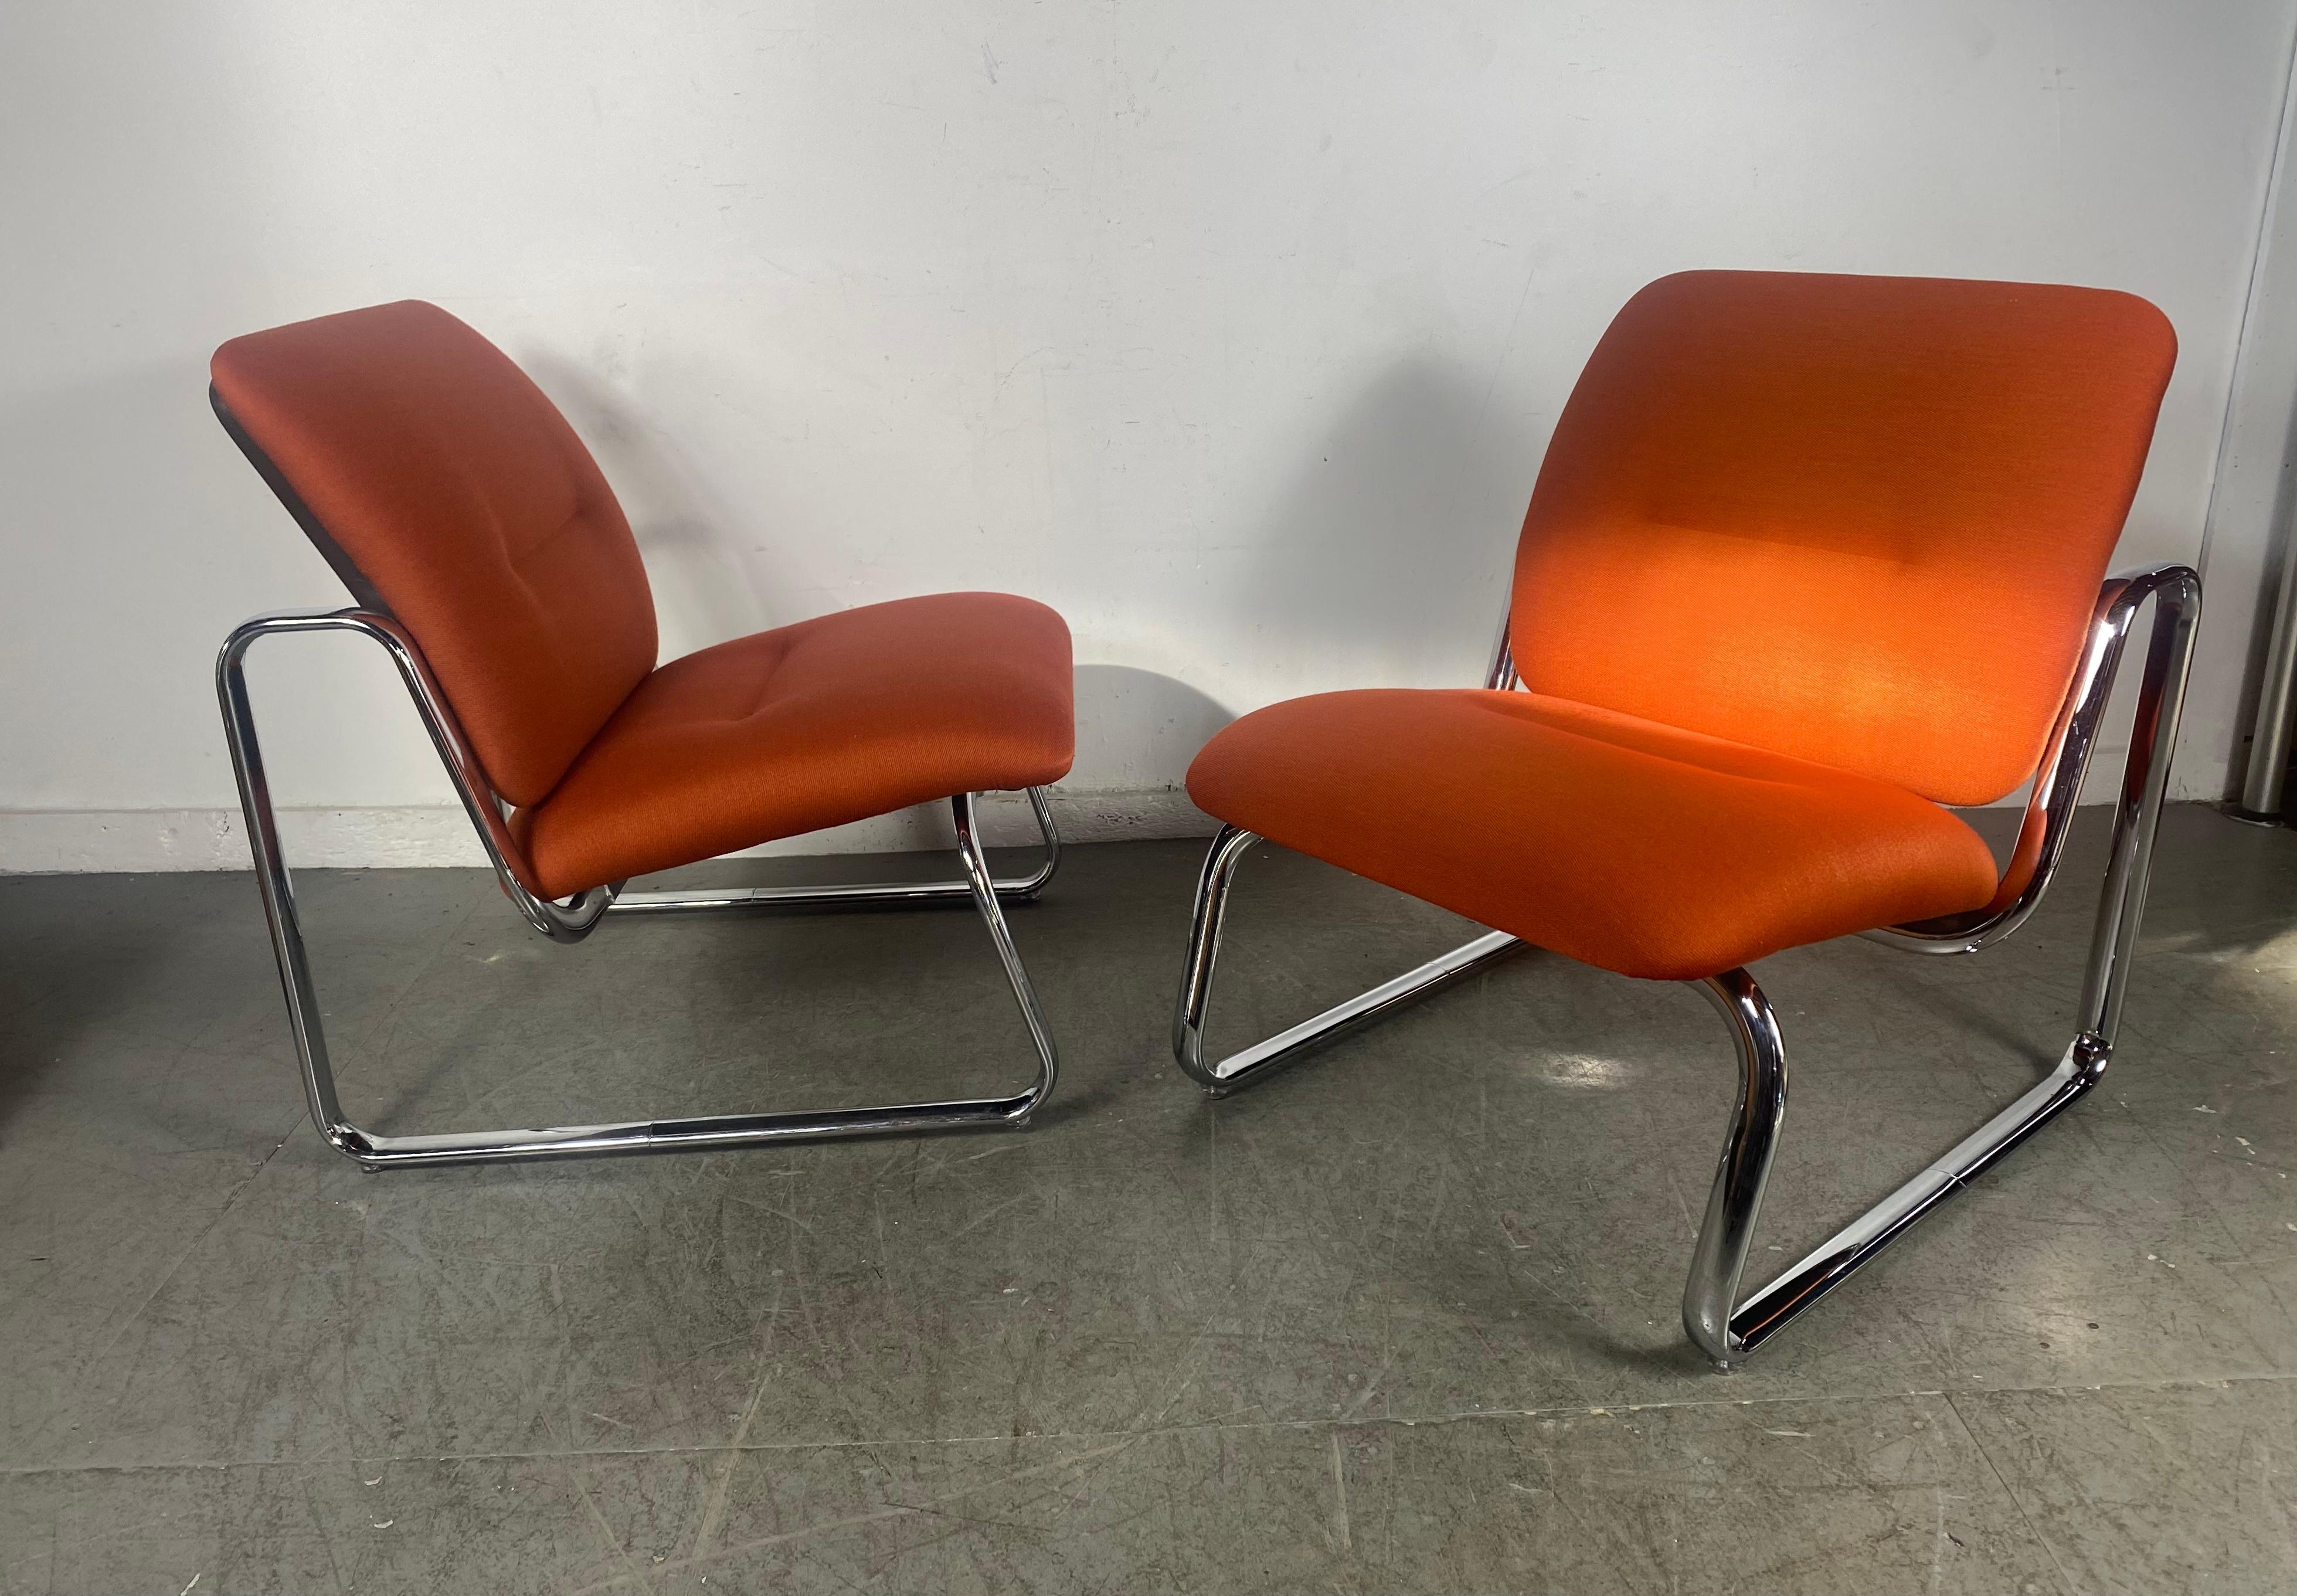 Matched Pair Space Age Modernist Lounge Chairs, Peter Protzmann/ Herman Miller For Sale 5